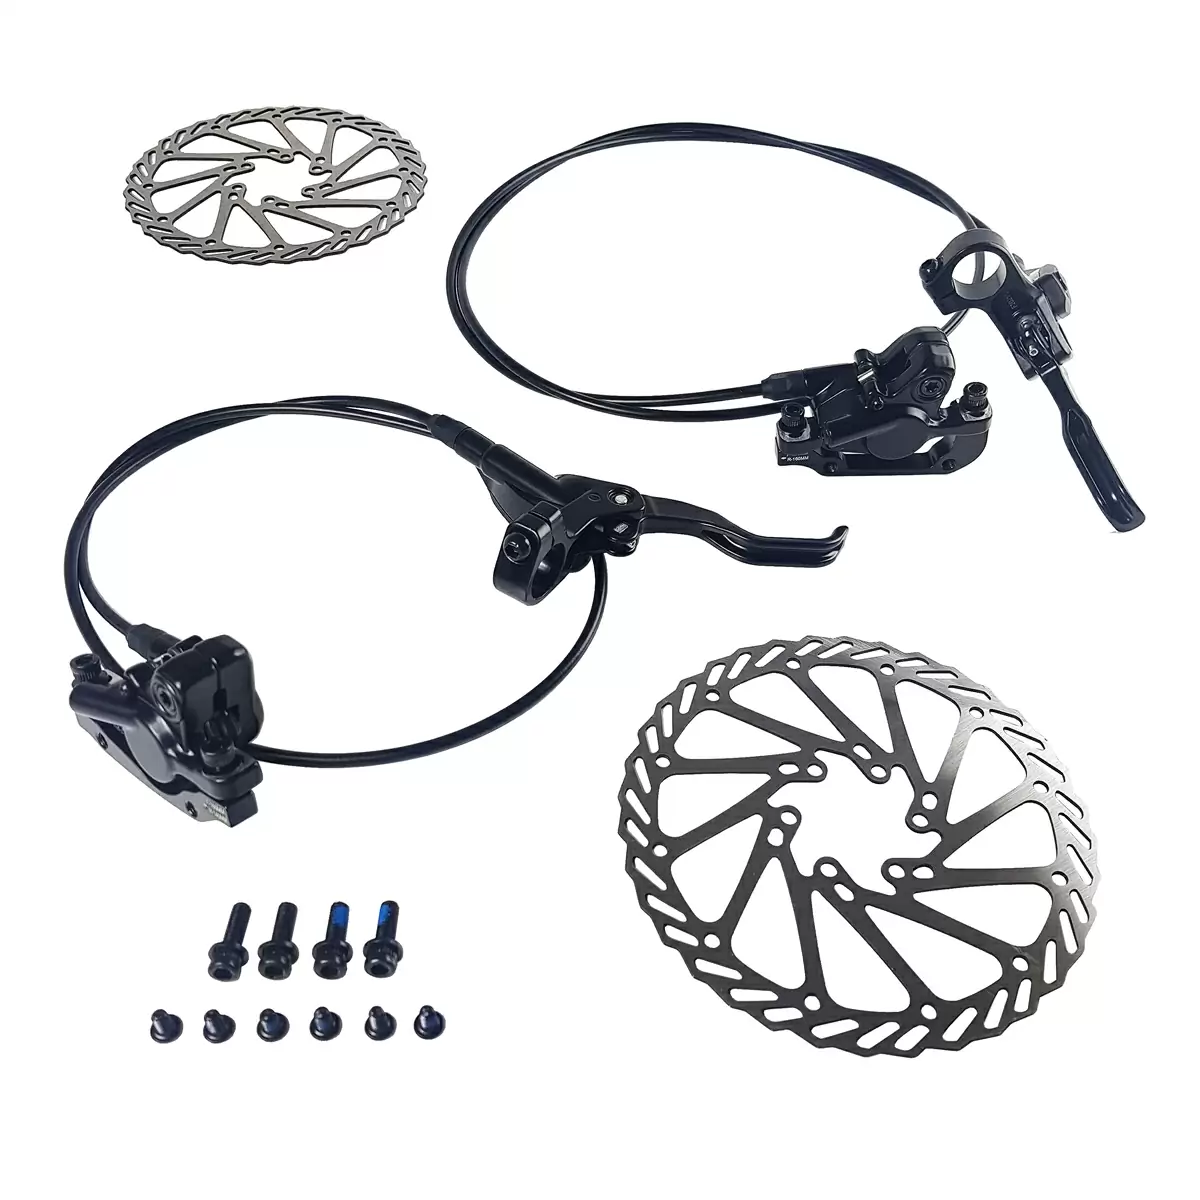 TD-8714 Front / Rear Hydraulic Disc Brakes Set with 160mm Discs - image